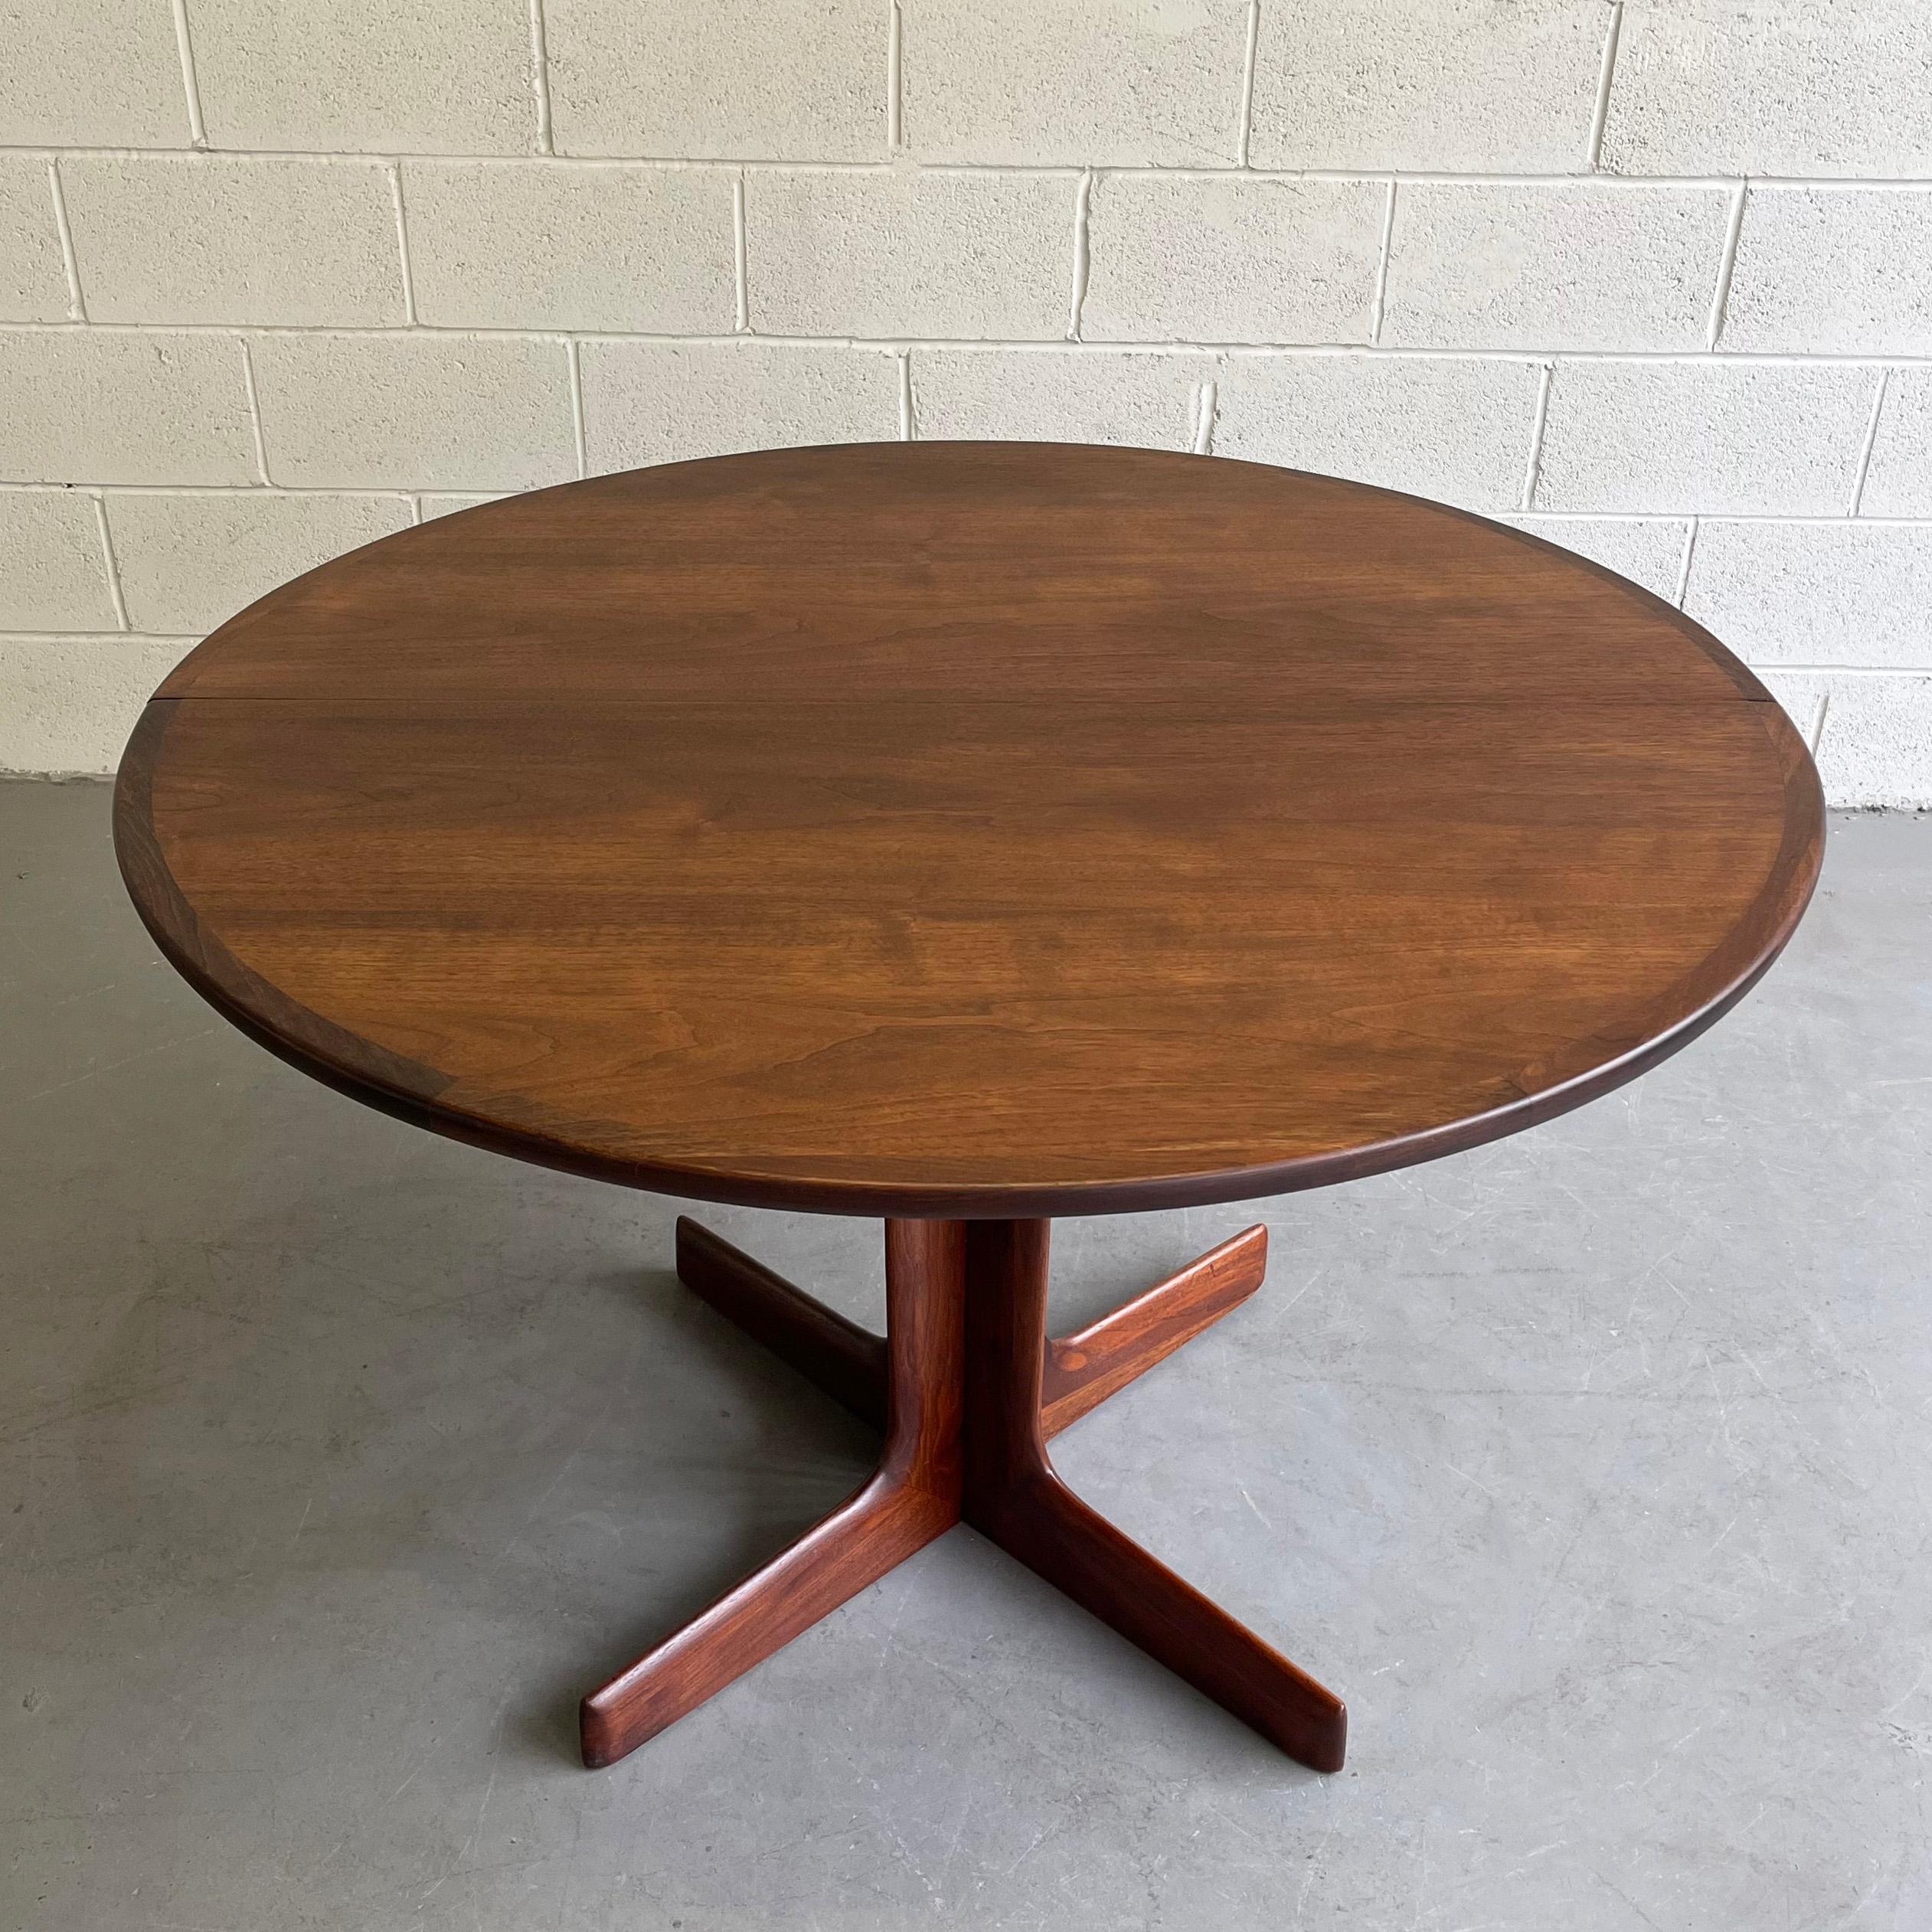 American Mid-Century Modern Round Walnut Extension Dining Table